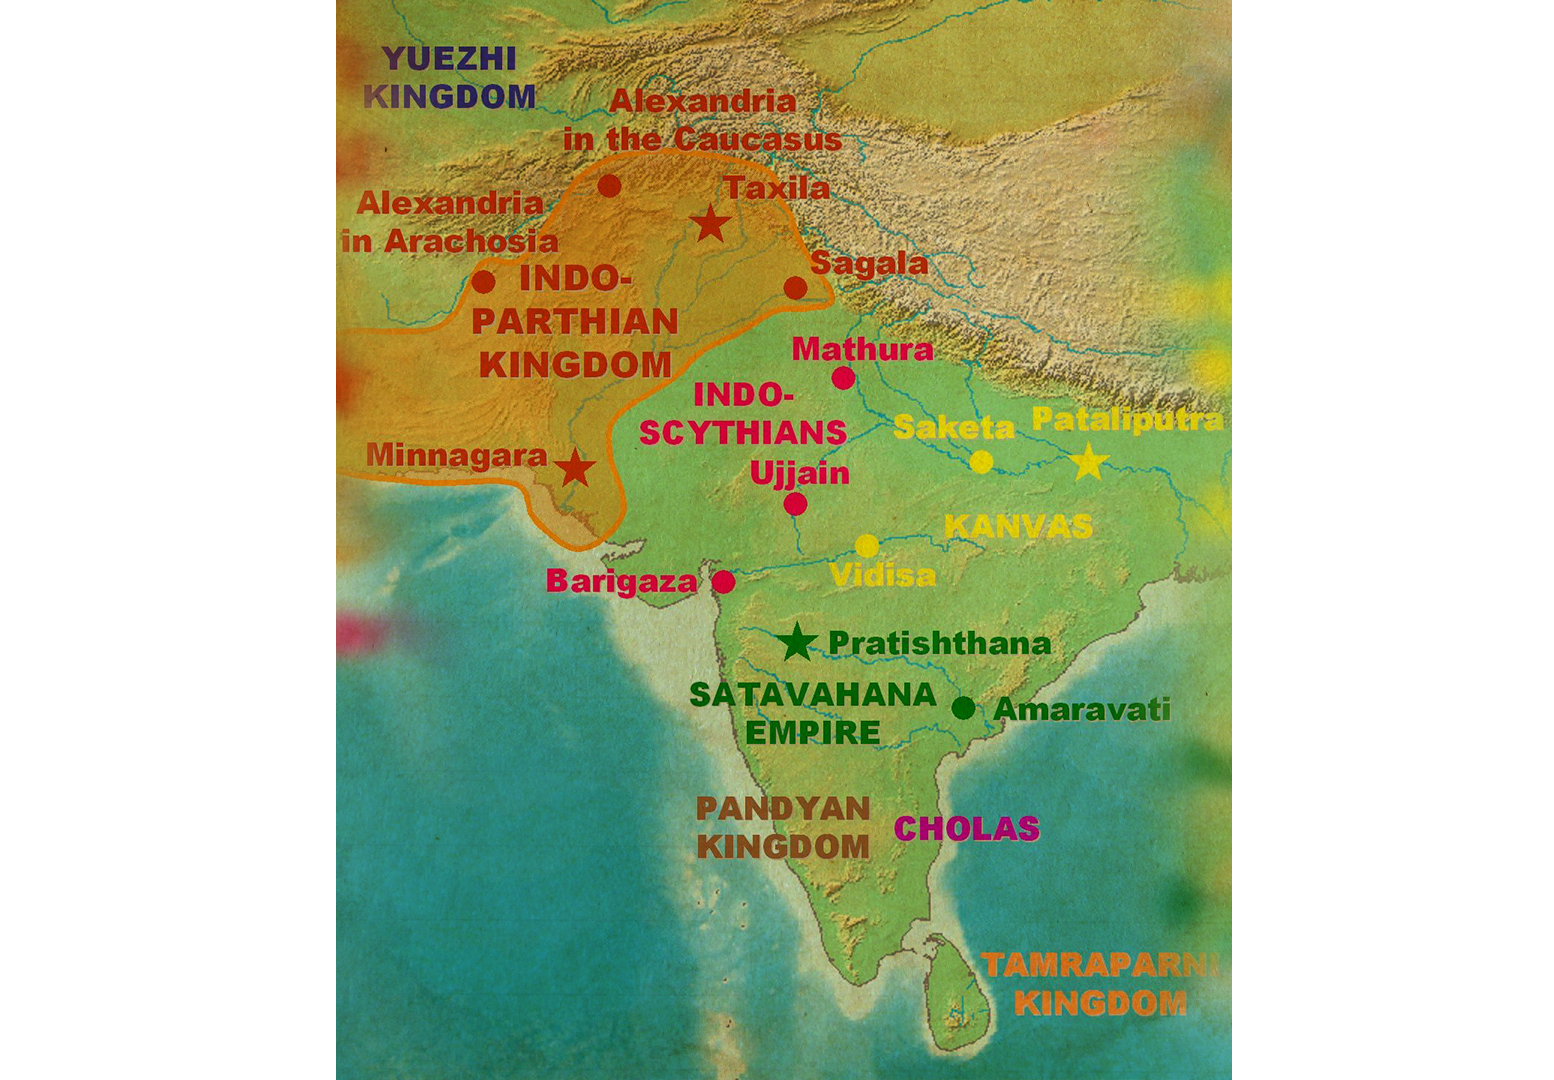 Extent of the Indo-Parthian Kingdom